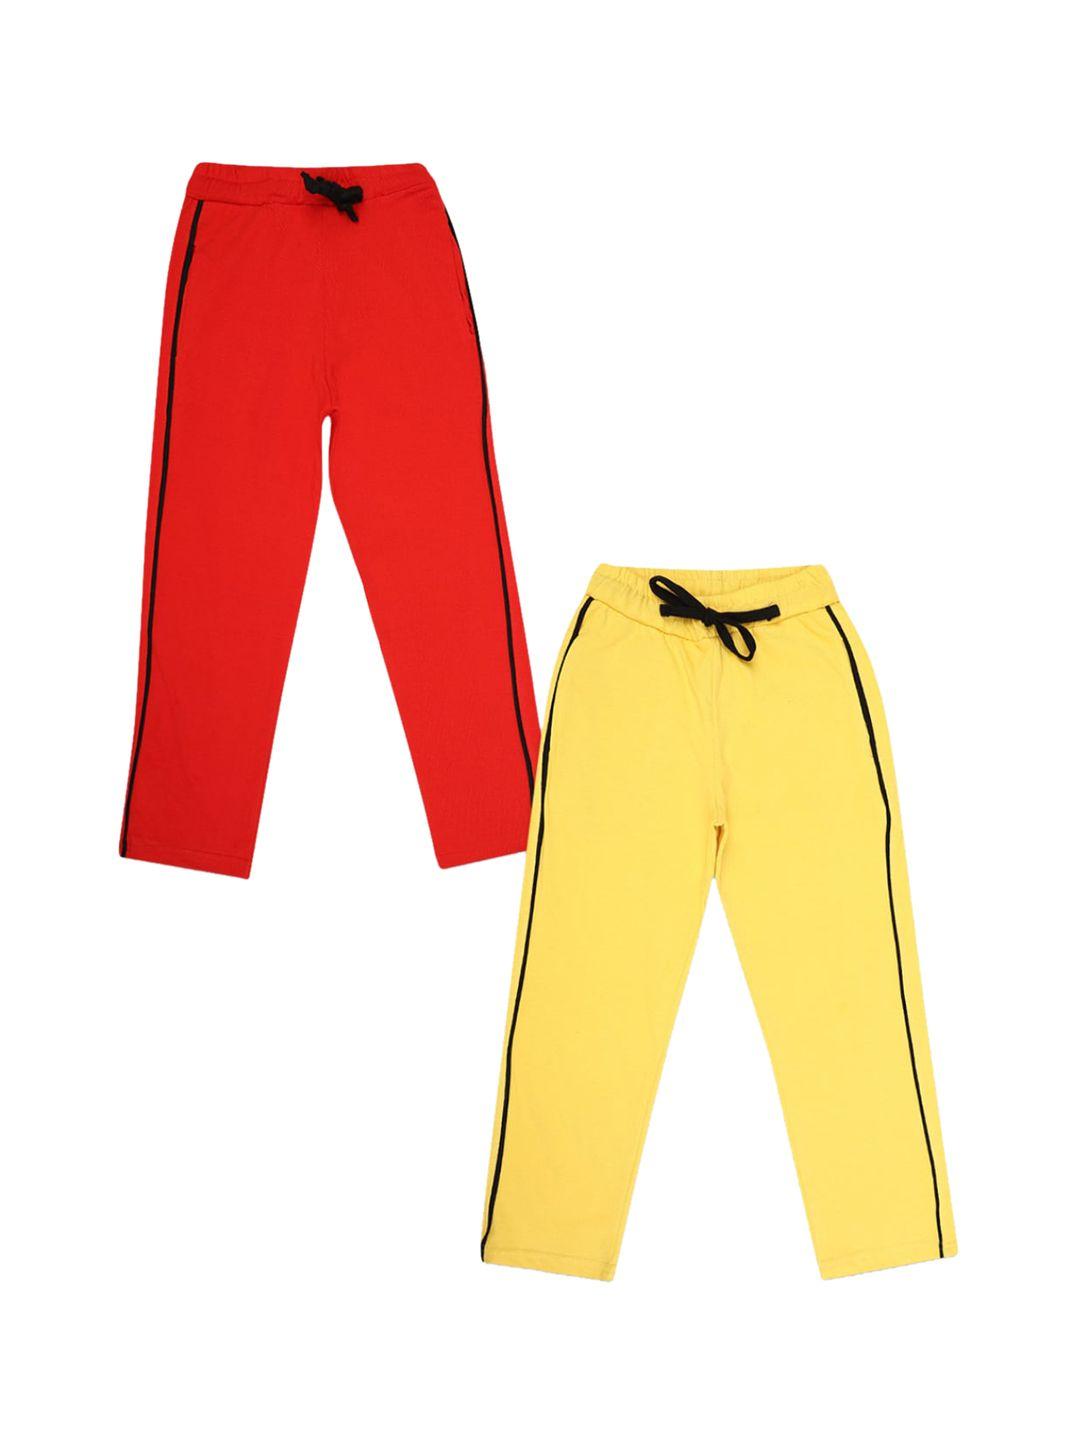 v-mart boys pack of 2 red & yellow cotton lounge pants